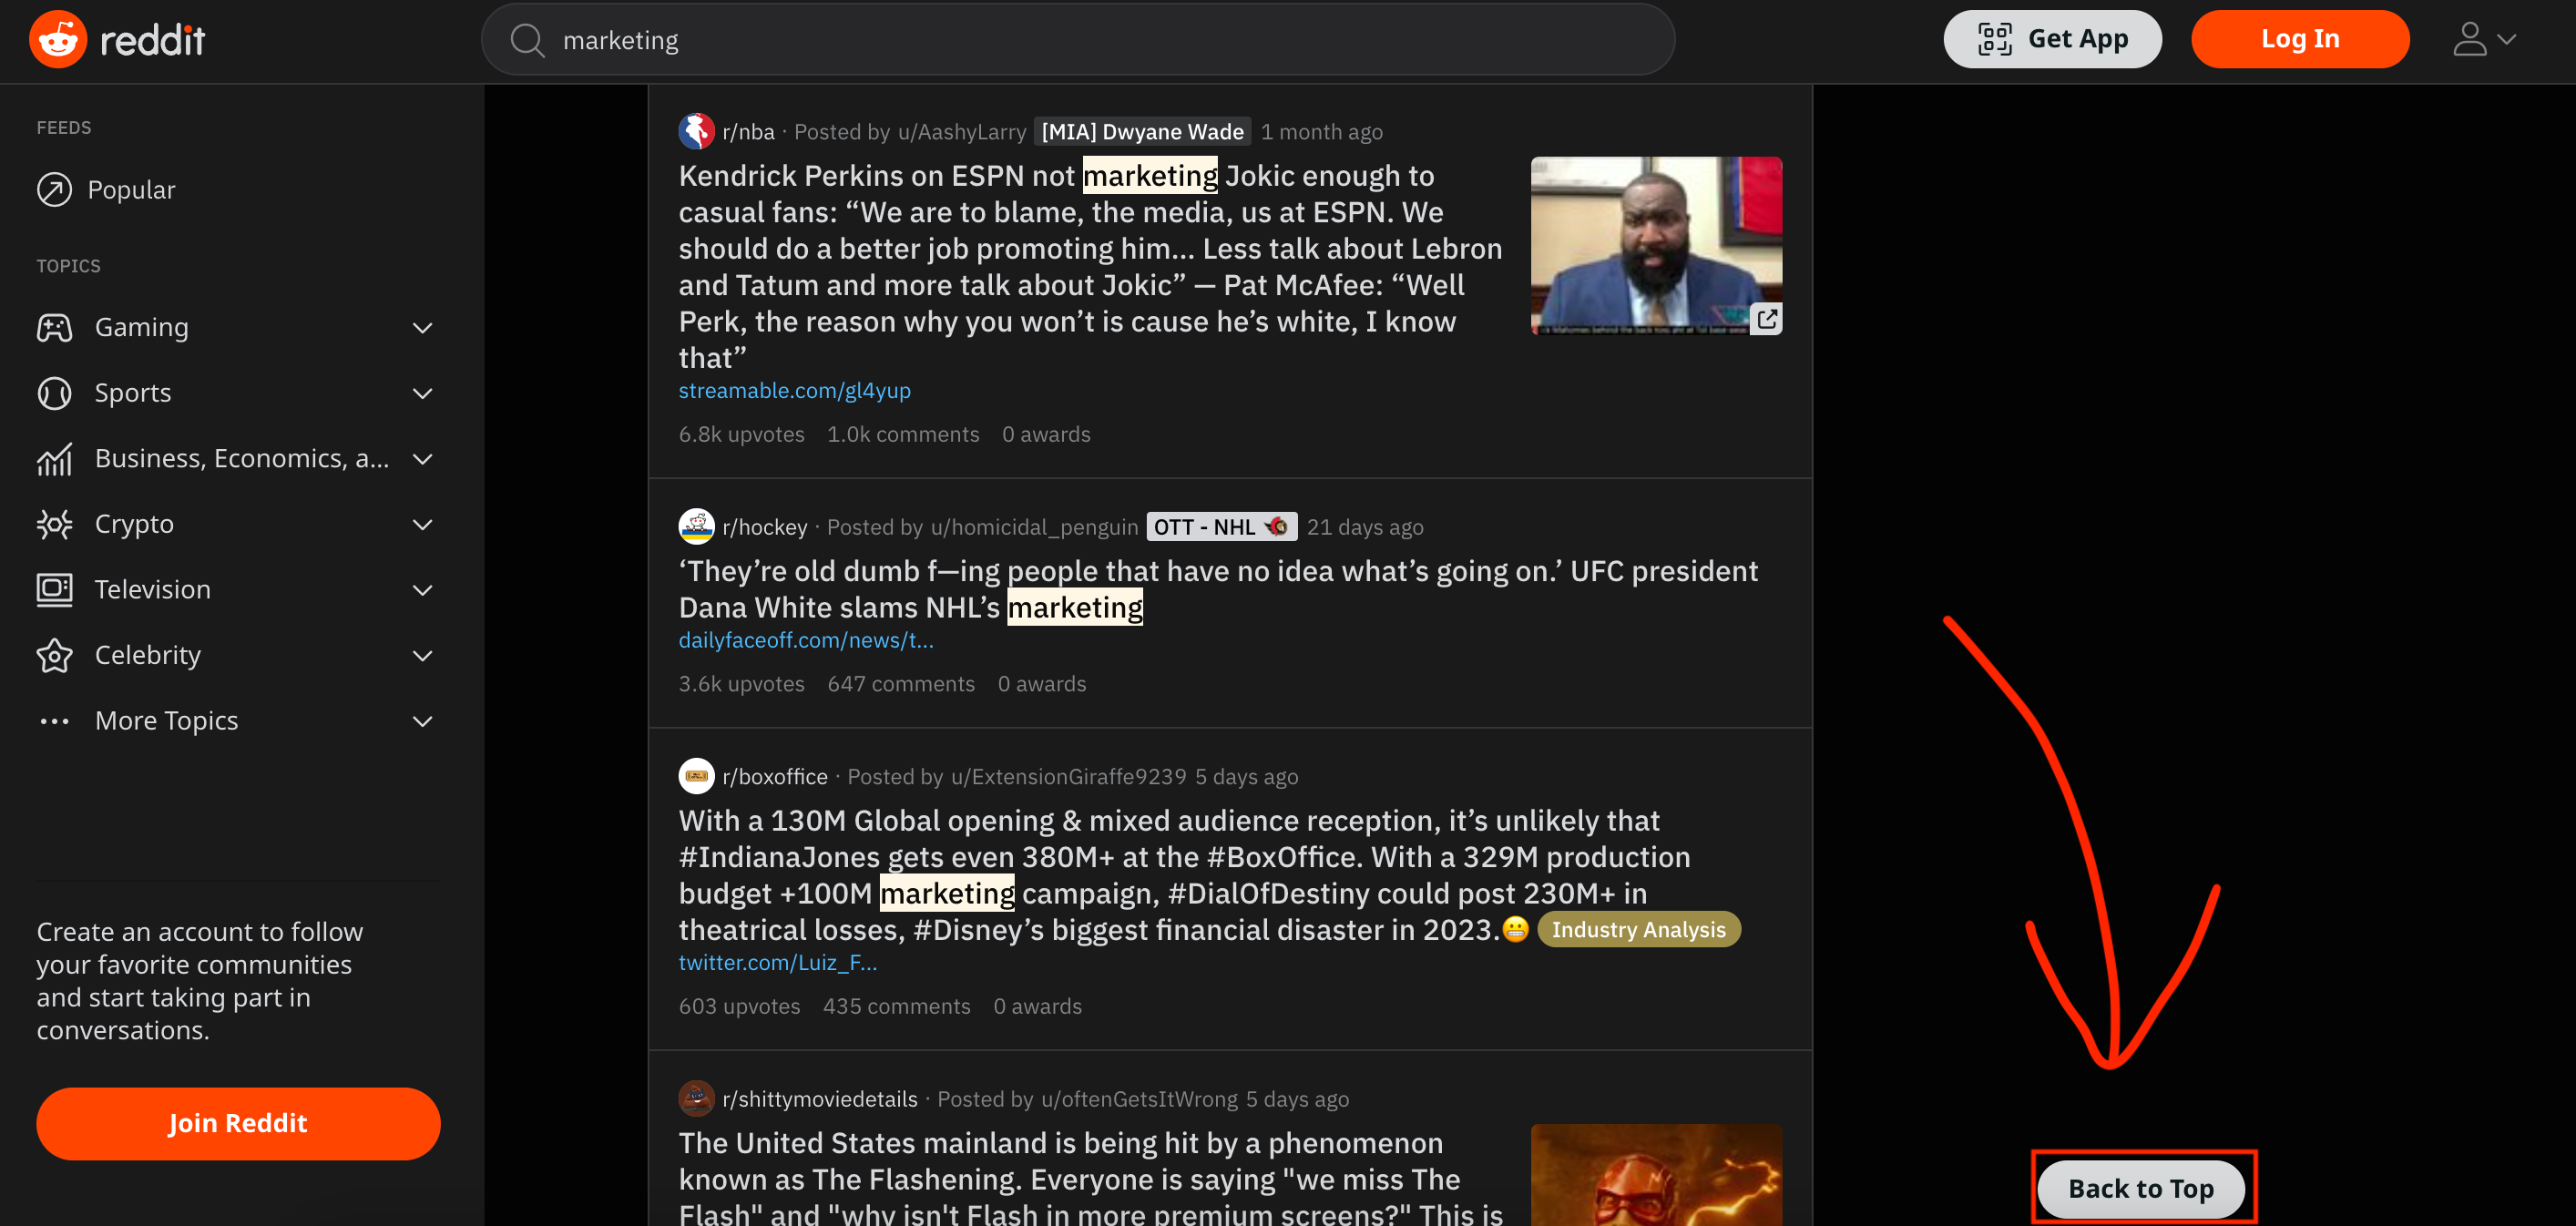 On reddit you can find a Back to Top button in the bottom right corner.